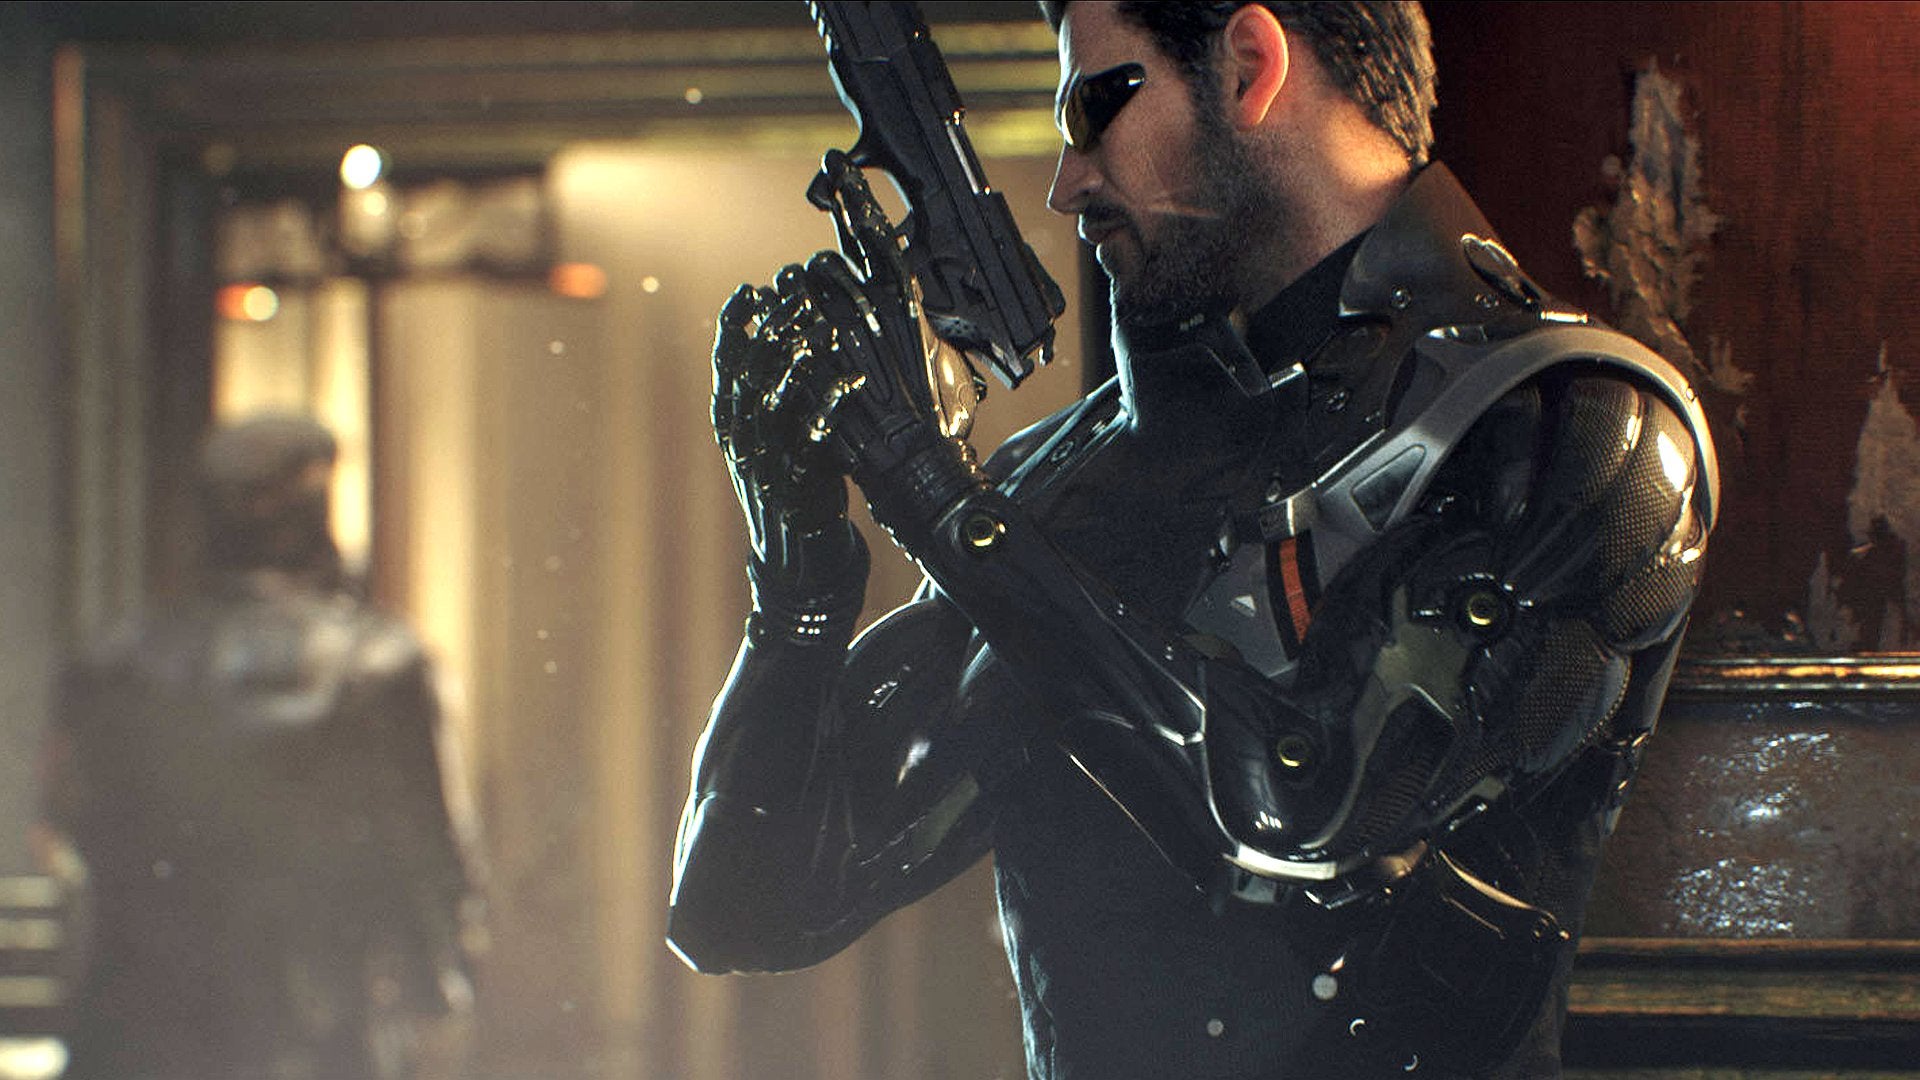 Image for PC patch notes for Deus Ex: Mankind Divided list general fixes, DirectX 12-specific updates